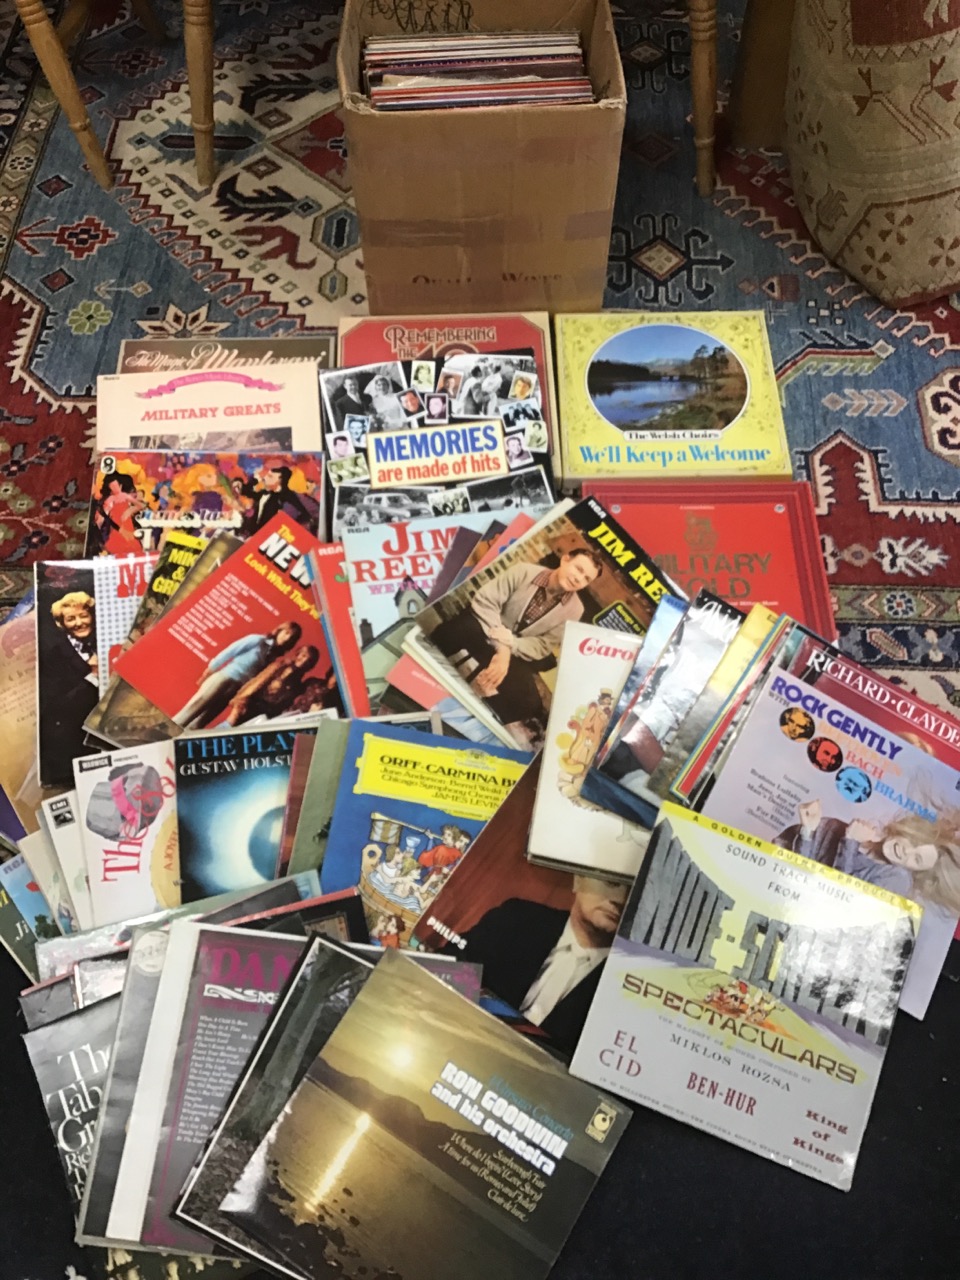 A collection of vinyl albums, including easy listening, choral, popular classical, military bands, - Bild 2 aus 3